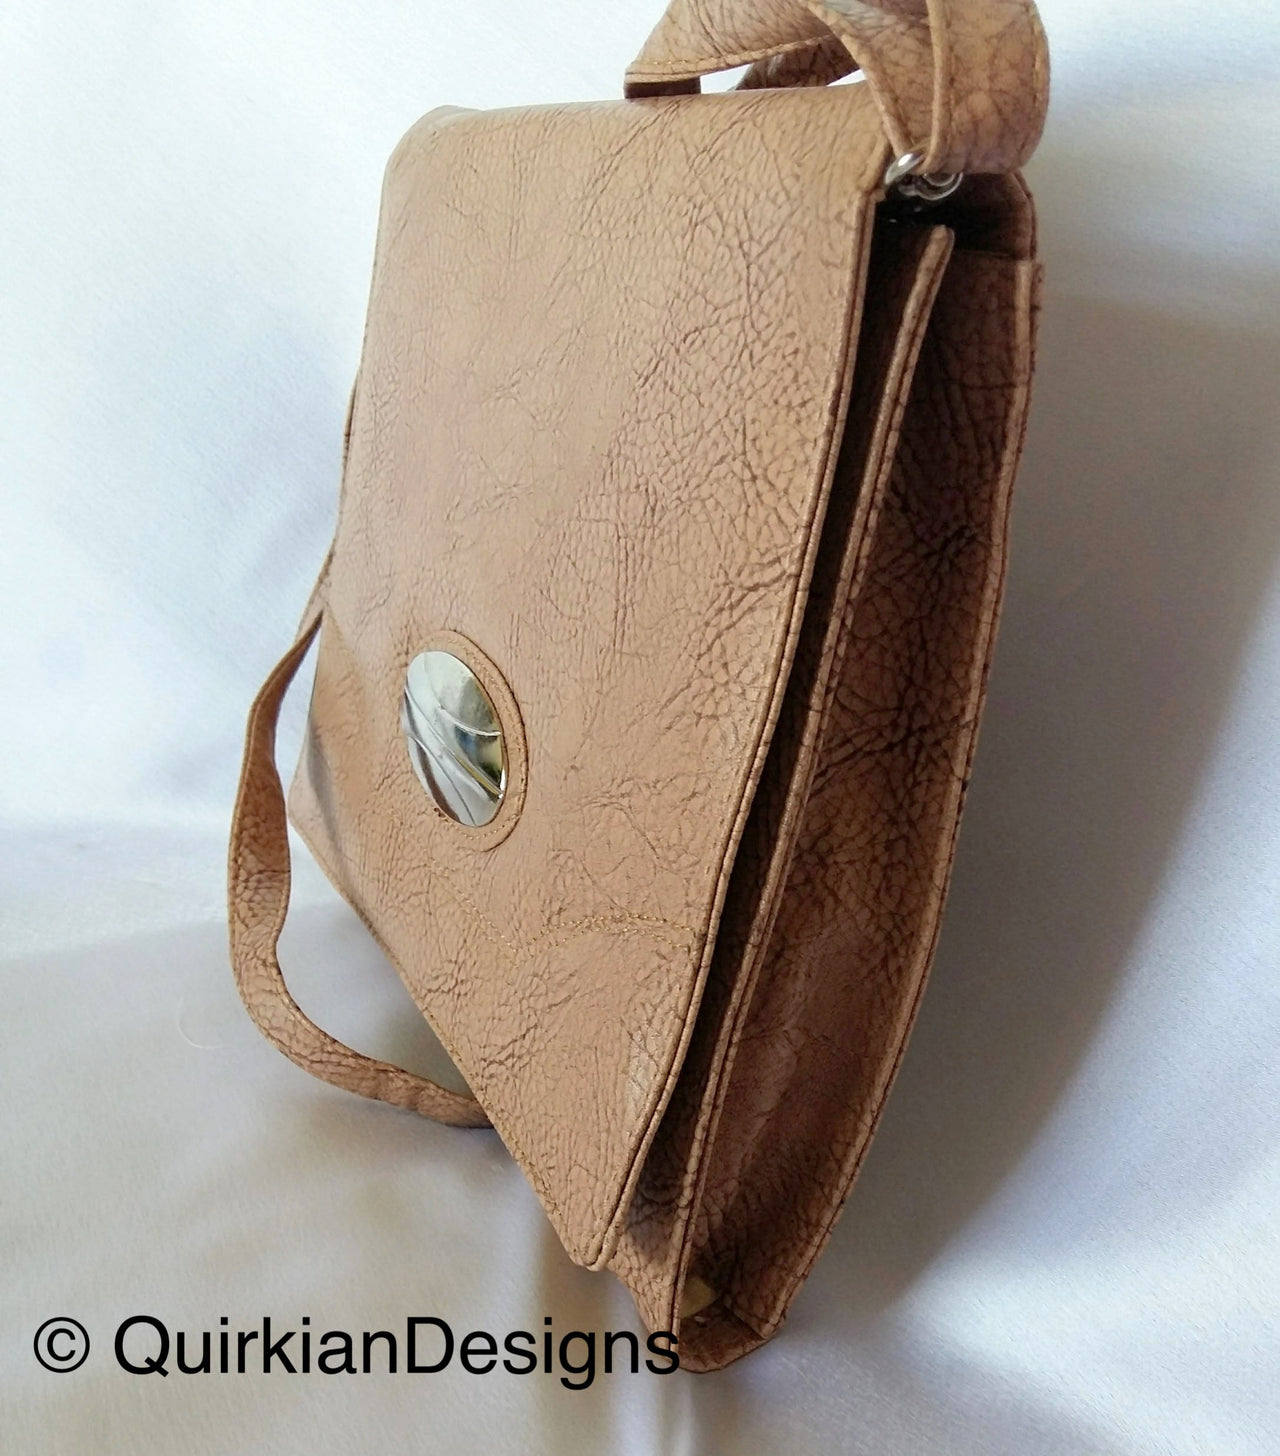 Beige Brown Fake Leather Bag, Day HandBag, Shopping Crossbody Sling Purse, Faux Leather Bag, Office Wear